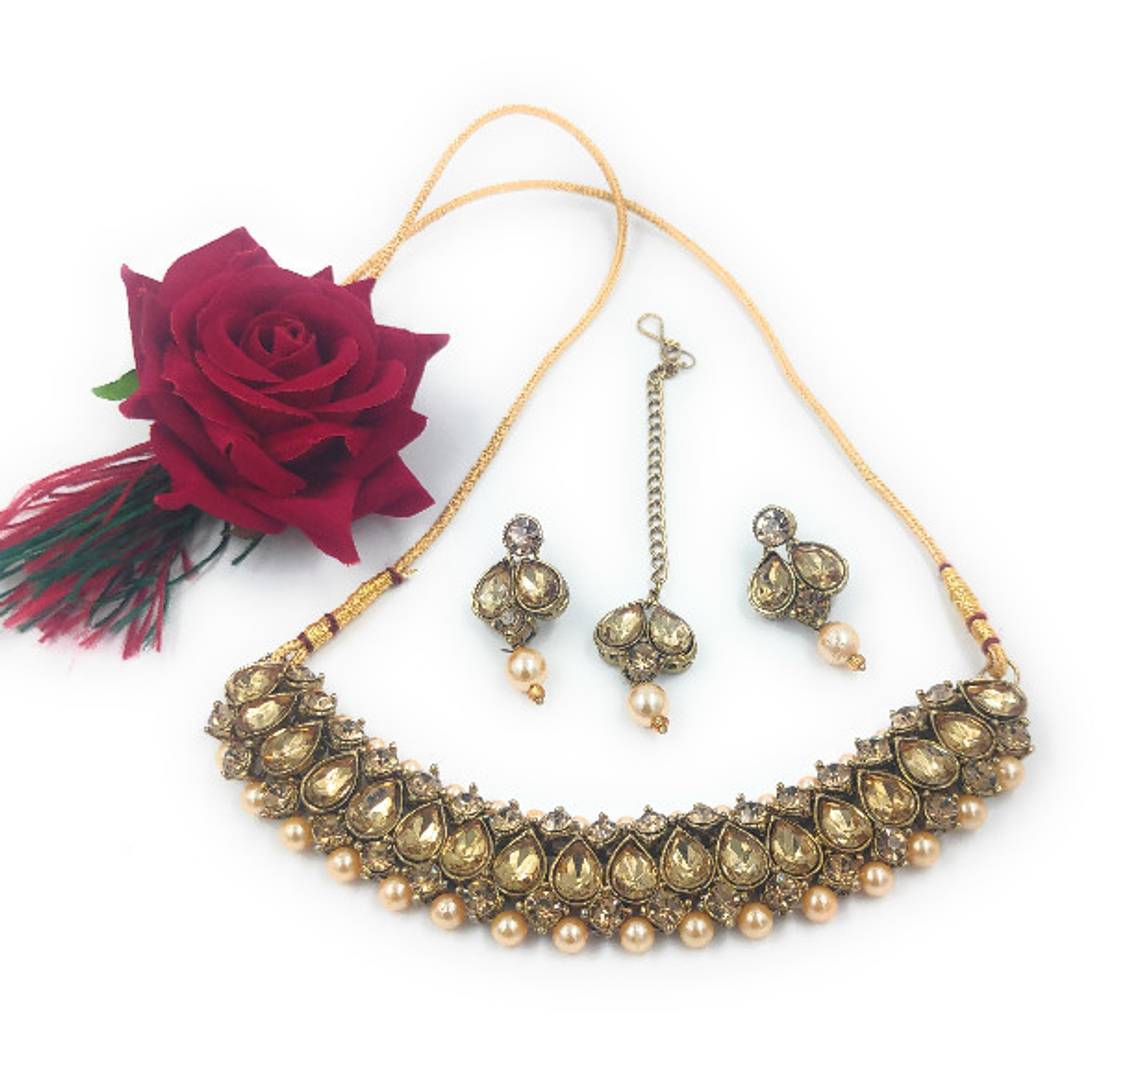 Trendy Alloy Choker with Earring and Mangtika for Women